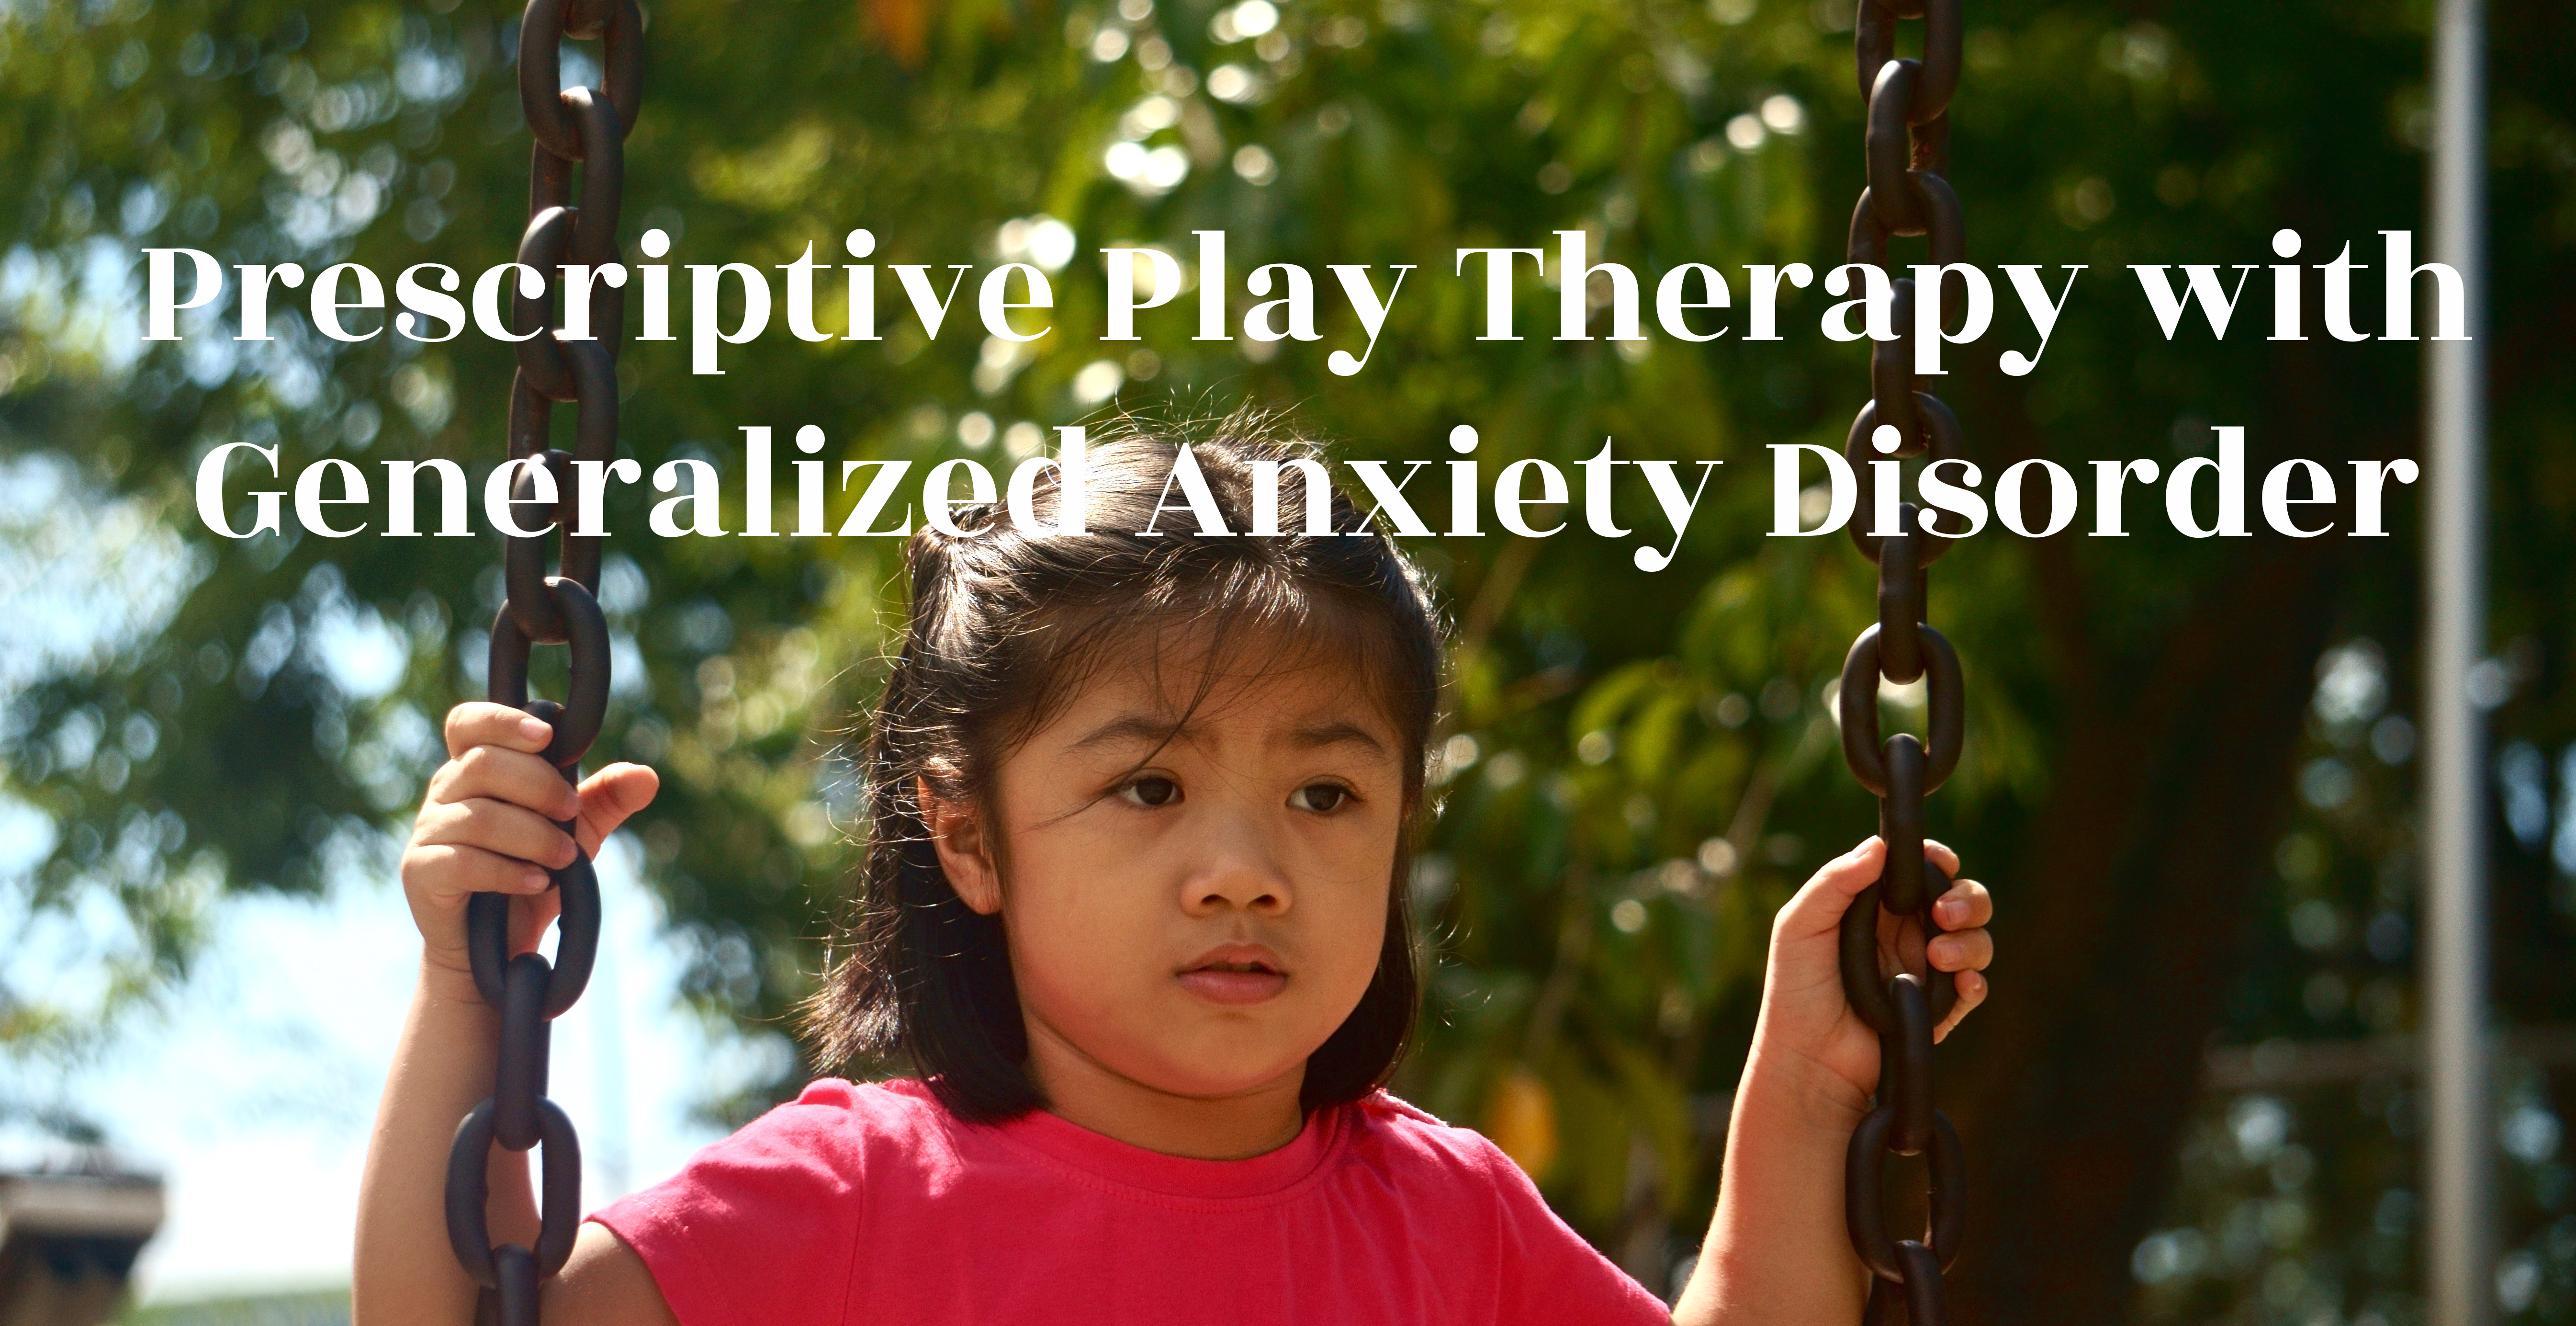 Play Therapy with Generalized Anxiety Disorder